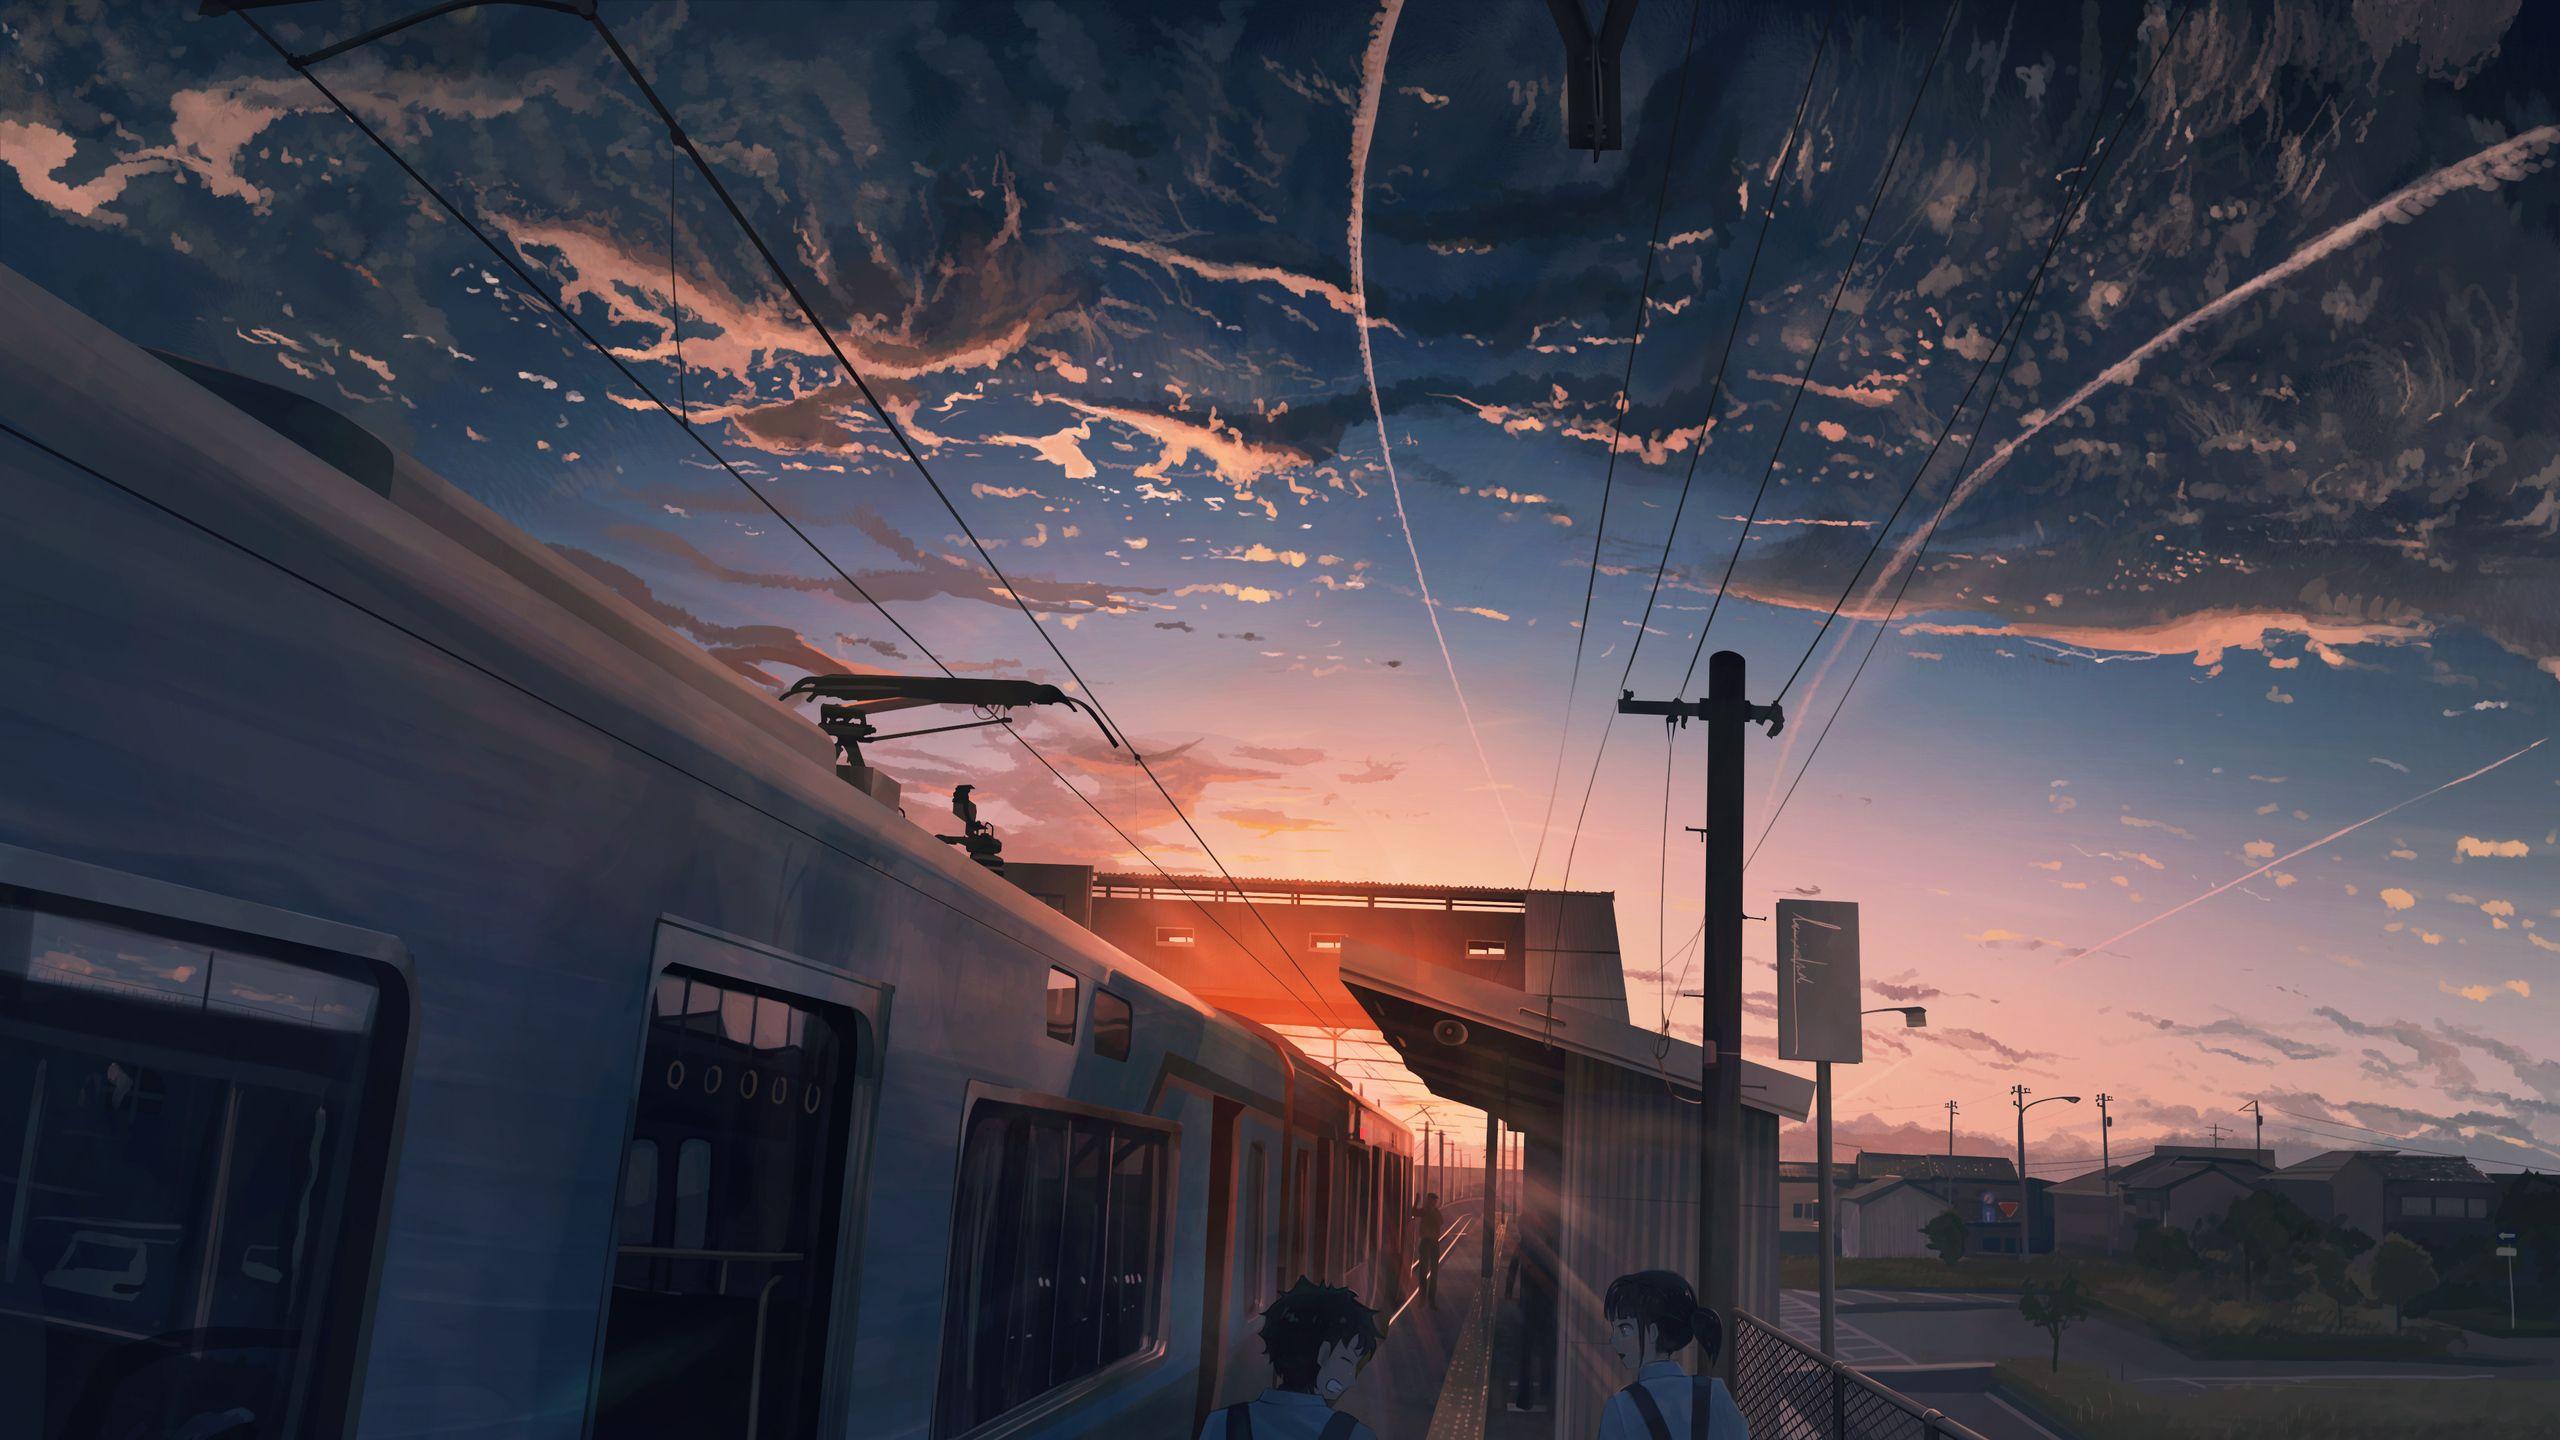 Anime Train Wallpapers Top Free Anime Train Backgrounds Wallpaperaccess Trains at outdoor subway station with buildings on background. anime train wallpapers top free anime